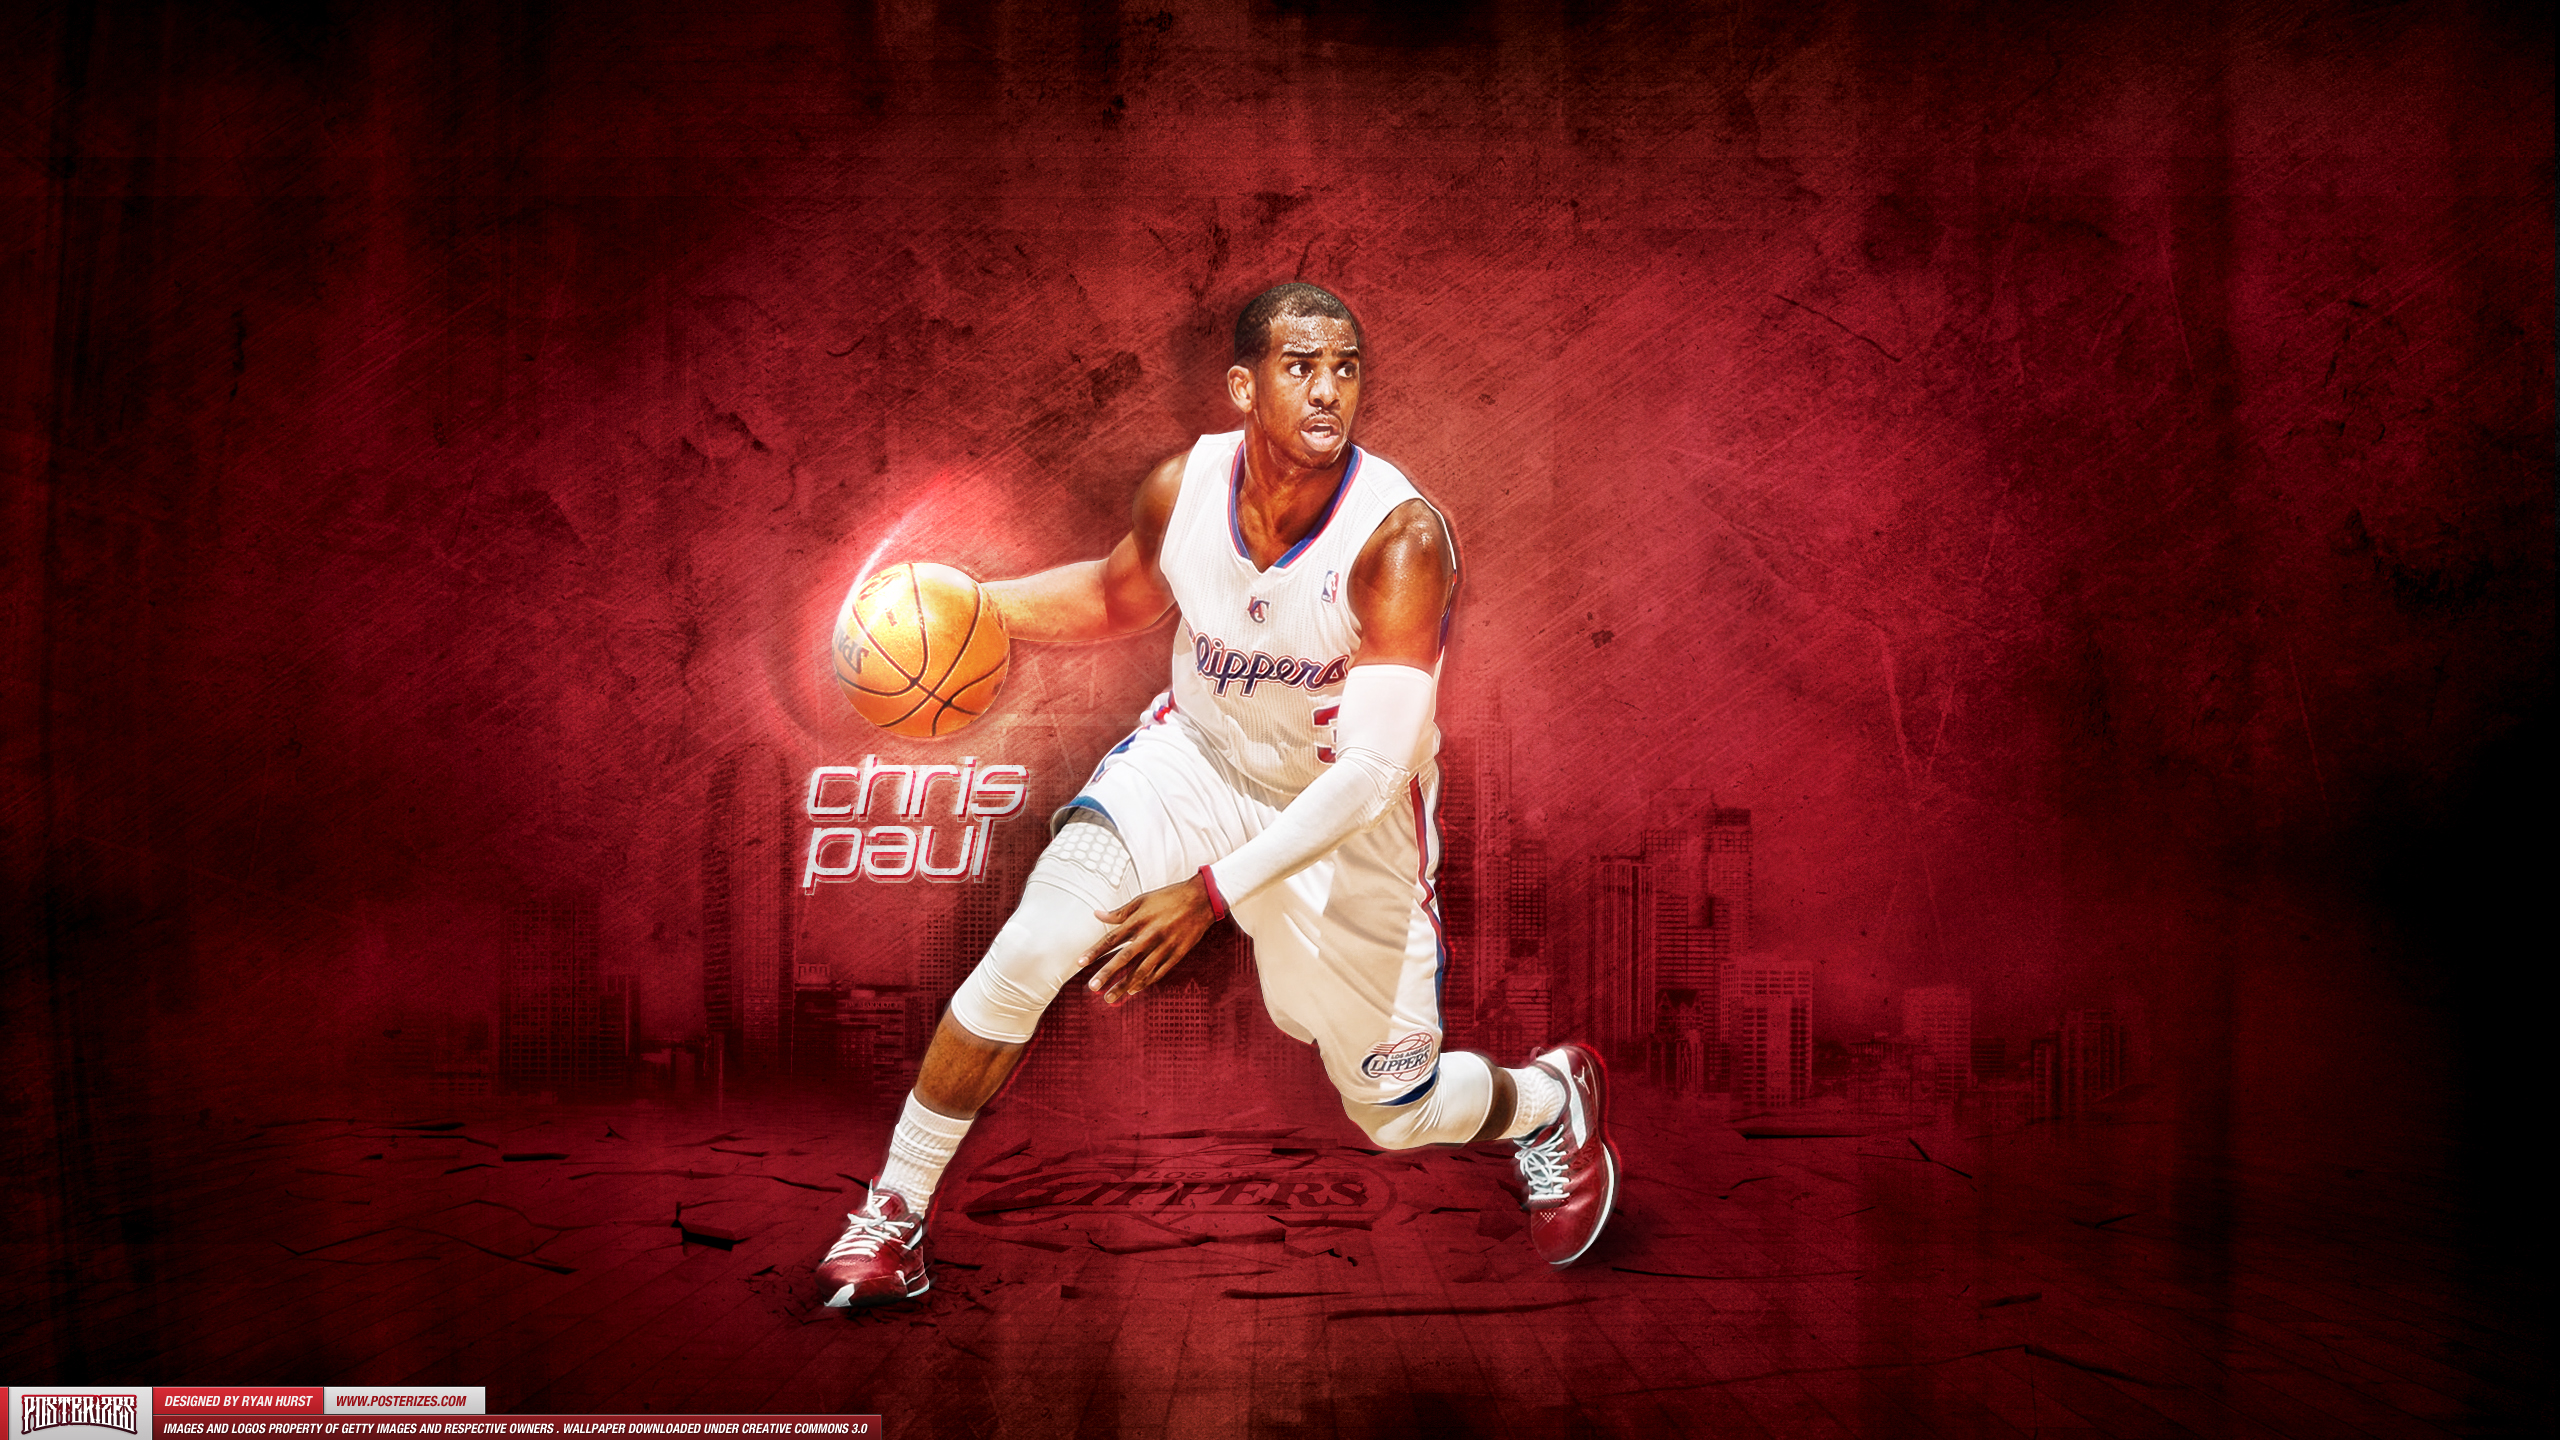 Threat Your Chris Paul Wallpaper From